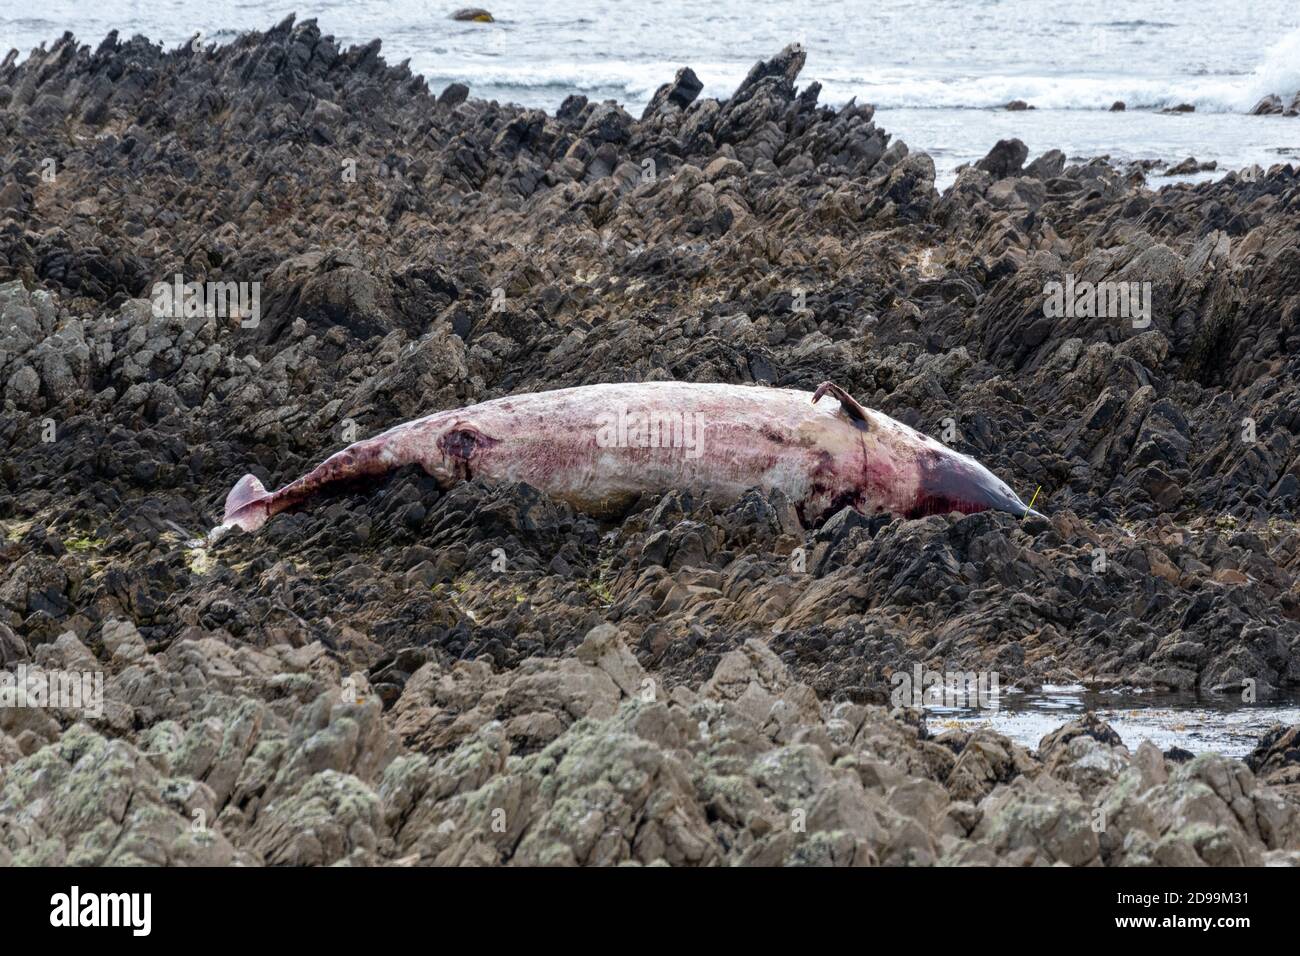 Dead Cetacean, probably a Porpoise, with what a appears to be plastic binding it’s mouth. Inishowen, Donegal . Stock Photo